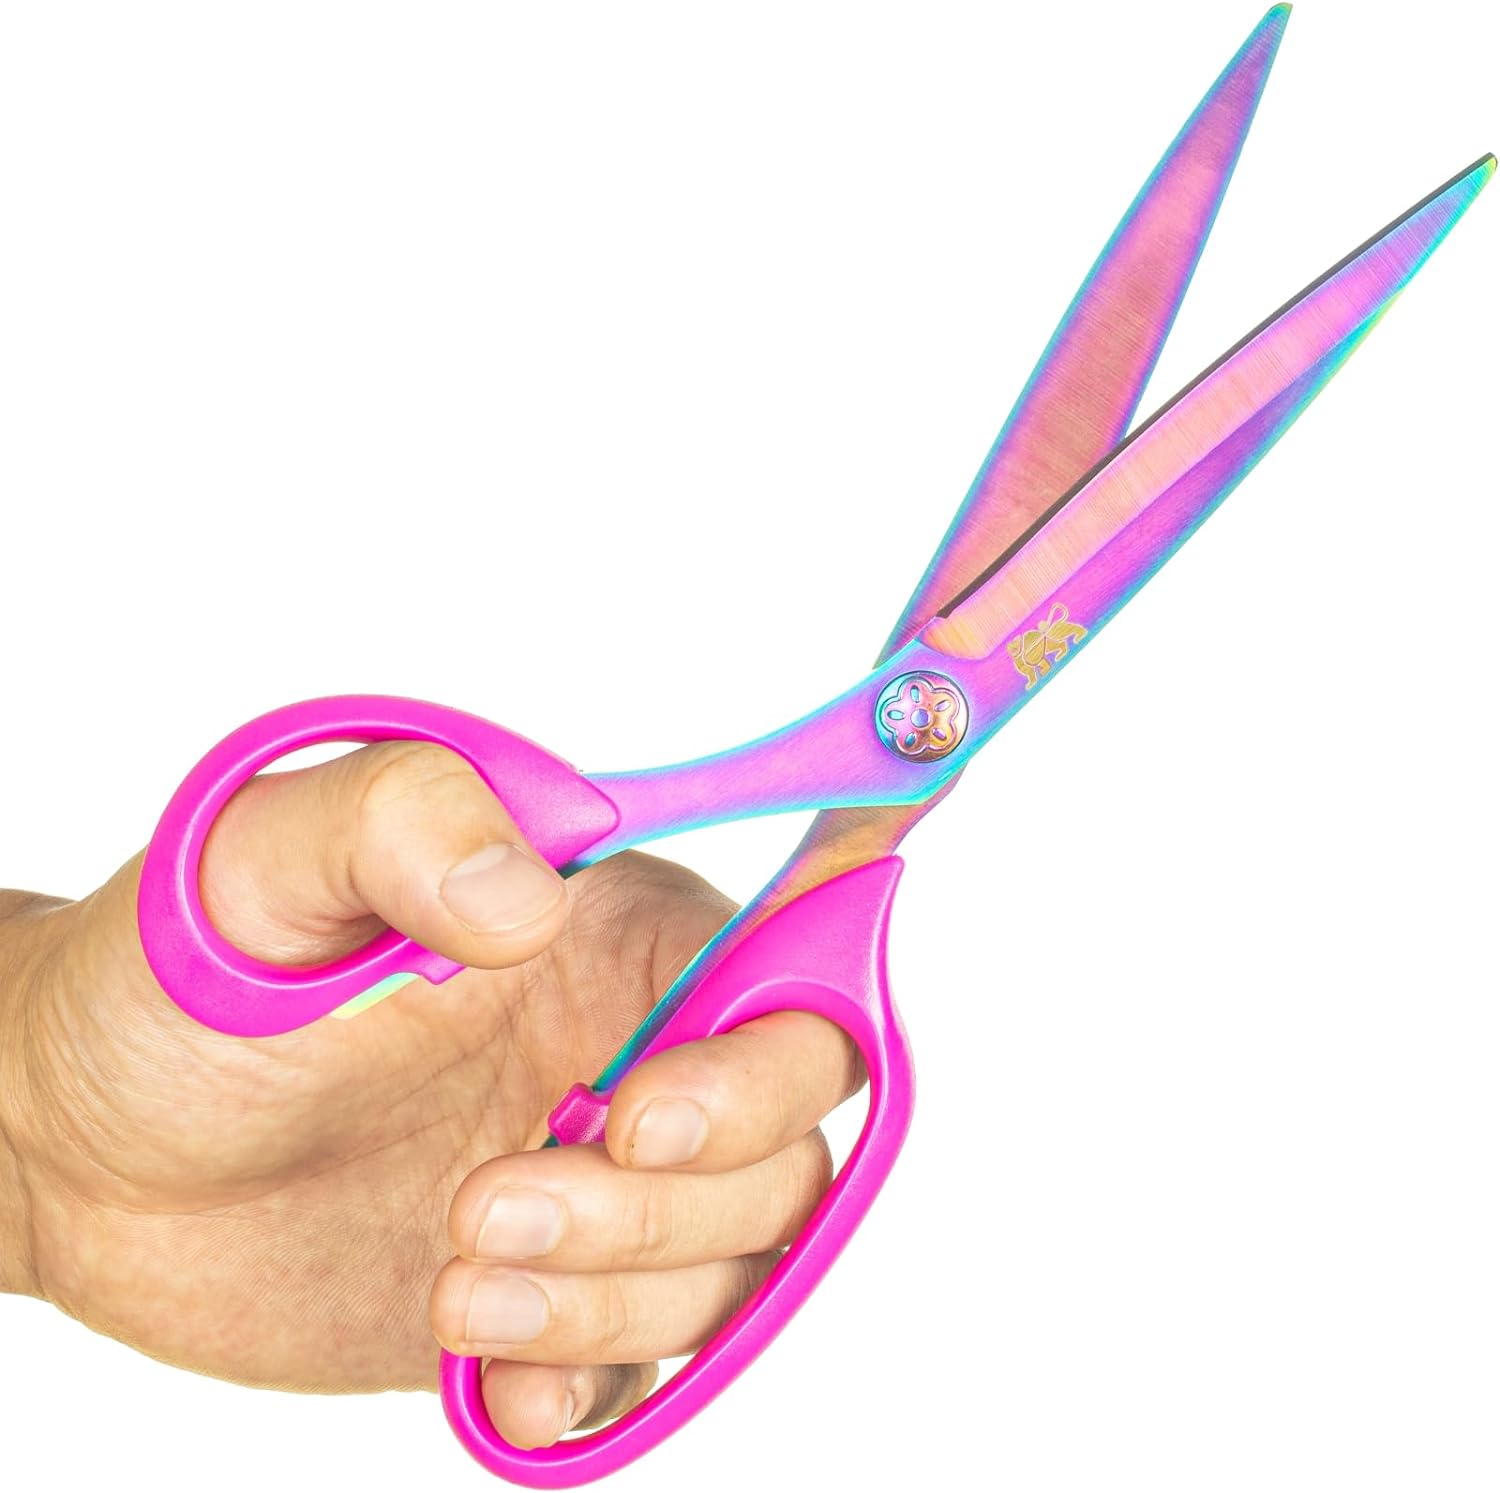 DIGNITY Left Handed Scissors Review